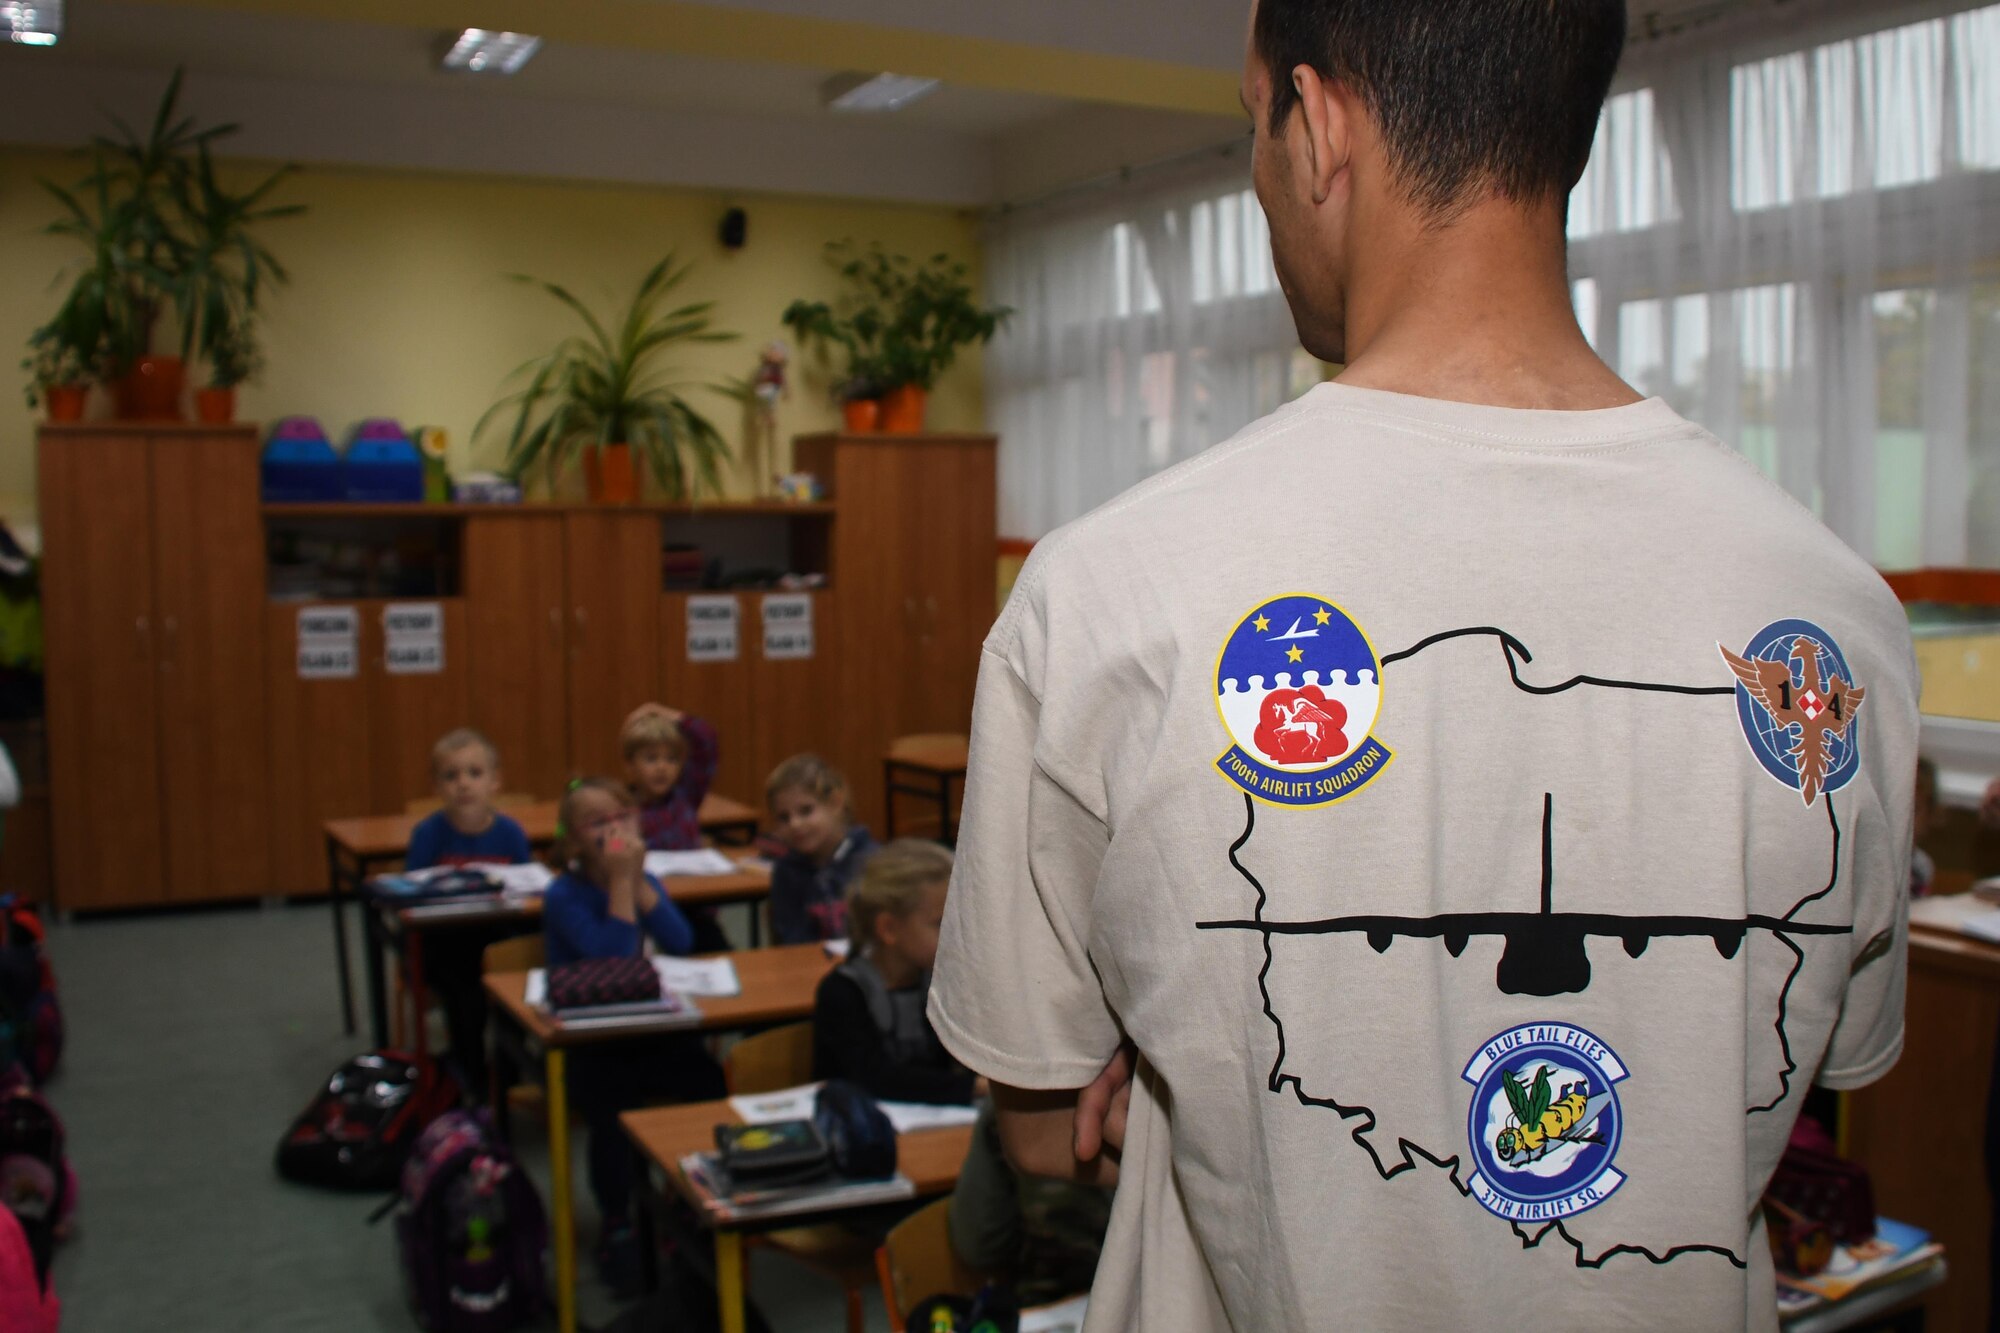 Airman 1st Class Justice Jahn, 86th Aircraft Maintenance Squadron crew chief, speaks with students at Elementary School No. Nine in Gniezno, Poland, Oct. 19, 2016. The discussion was part of a cultural orientation visit he participated in while members of the 94th Airlift Wing, Dobbins Air Reserve Base, Georgia, and the 86th Airlift Wing, Ramstein Air Base, work with the Polish air force during Aviation Detachment 17-1 in support of Operation Atlantic Resolve. (U.S. Air Force photo by Staff Sgt. Alan Abernethy)
